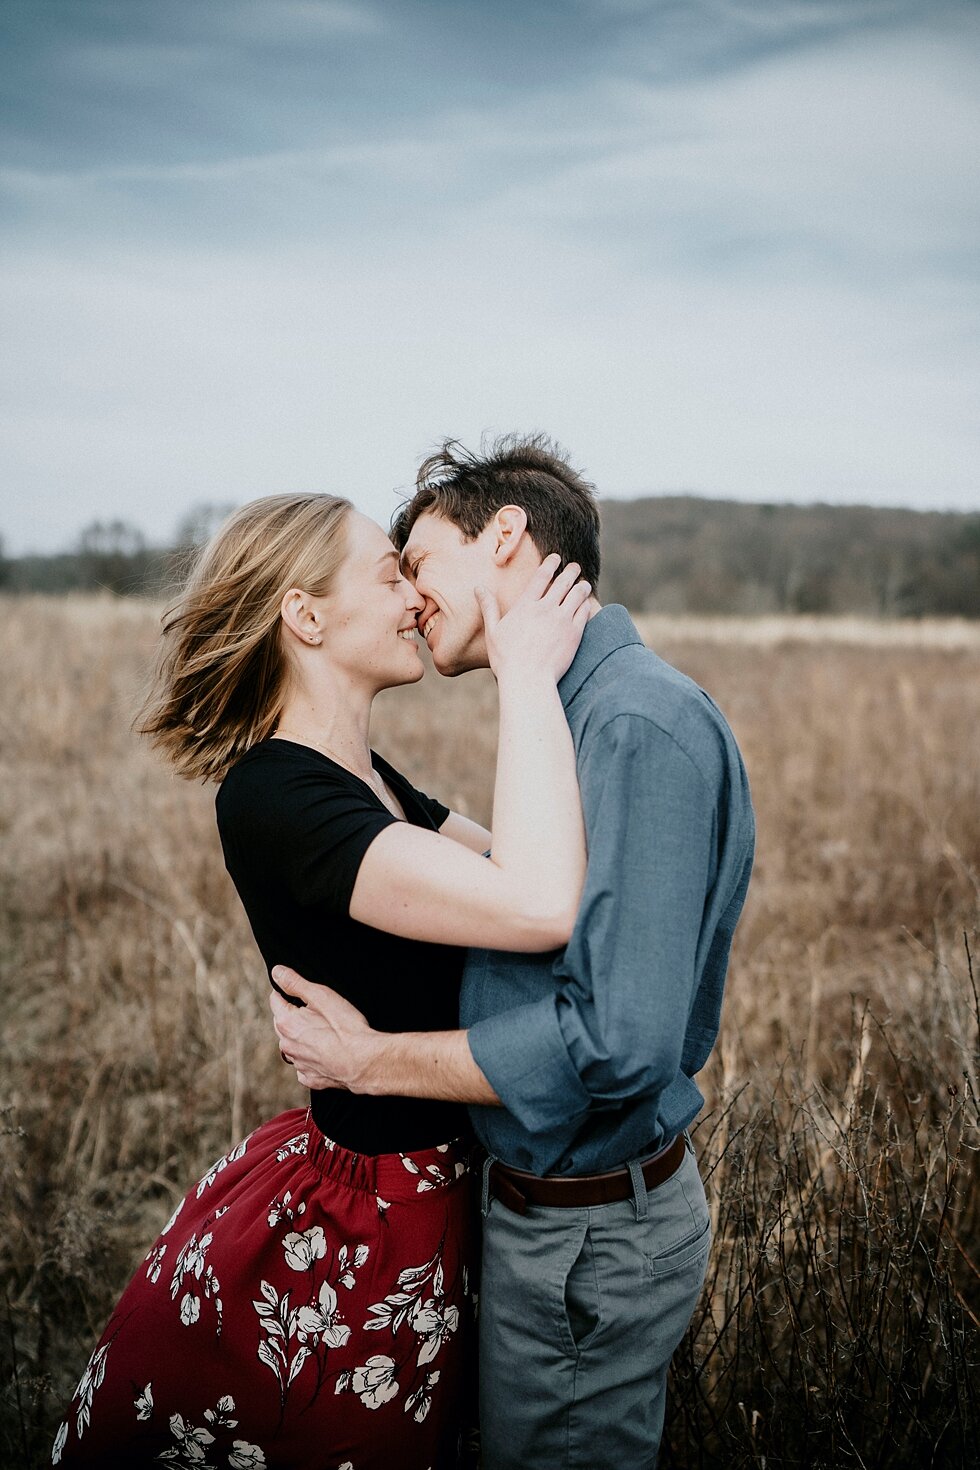  Head over heals couple sharing a kiss in the Kentucky outdoors for their engagement session in Louiseville, Kentucky. Kentucky mountains red floral skirt dark black shirt cloudy skies engagement session Photography by Lauren outdoor #photographybyla